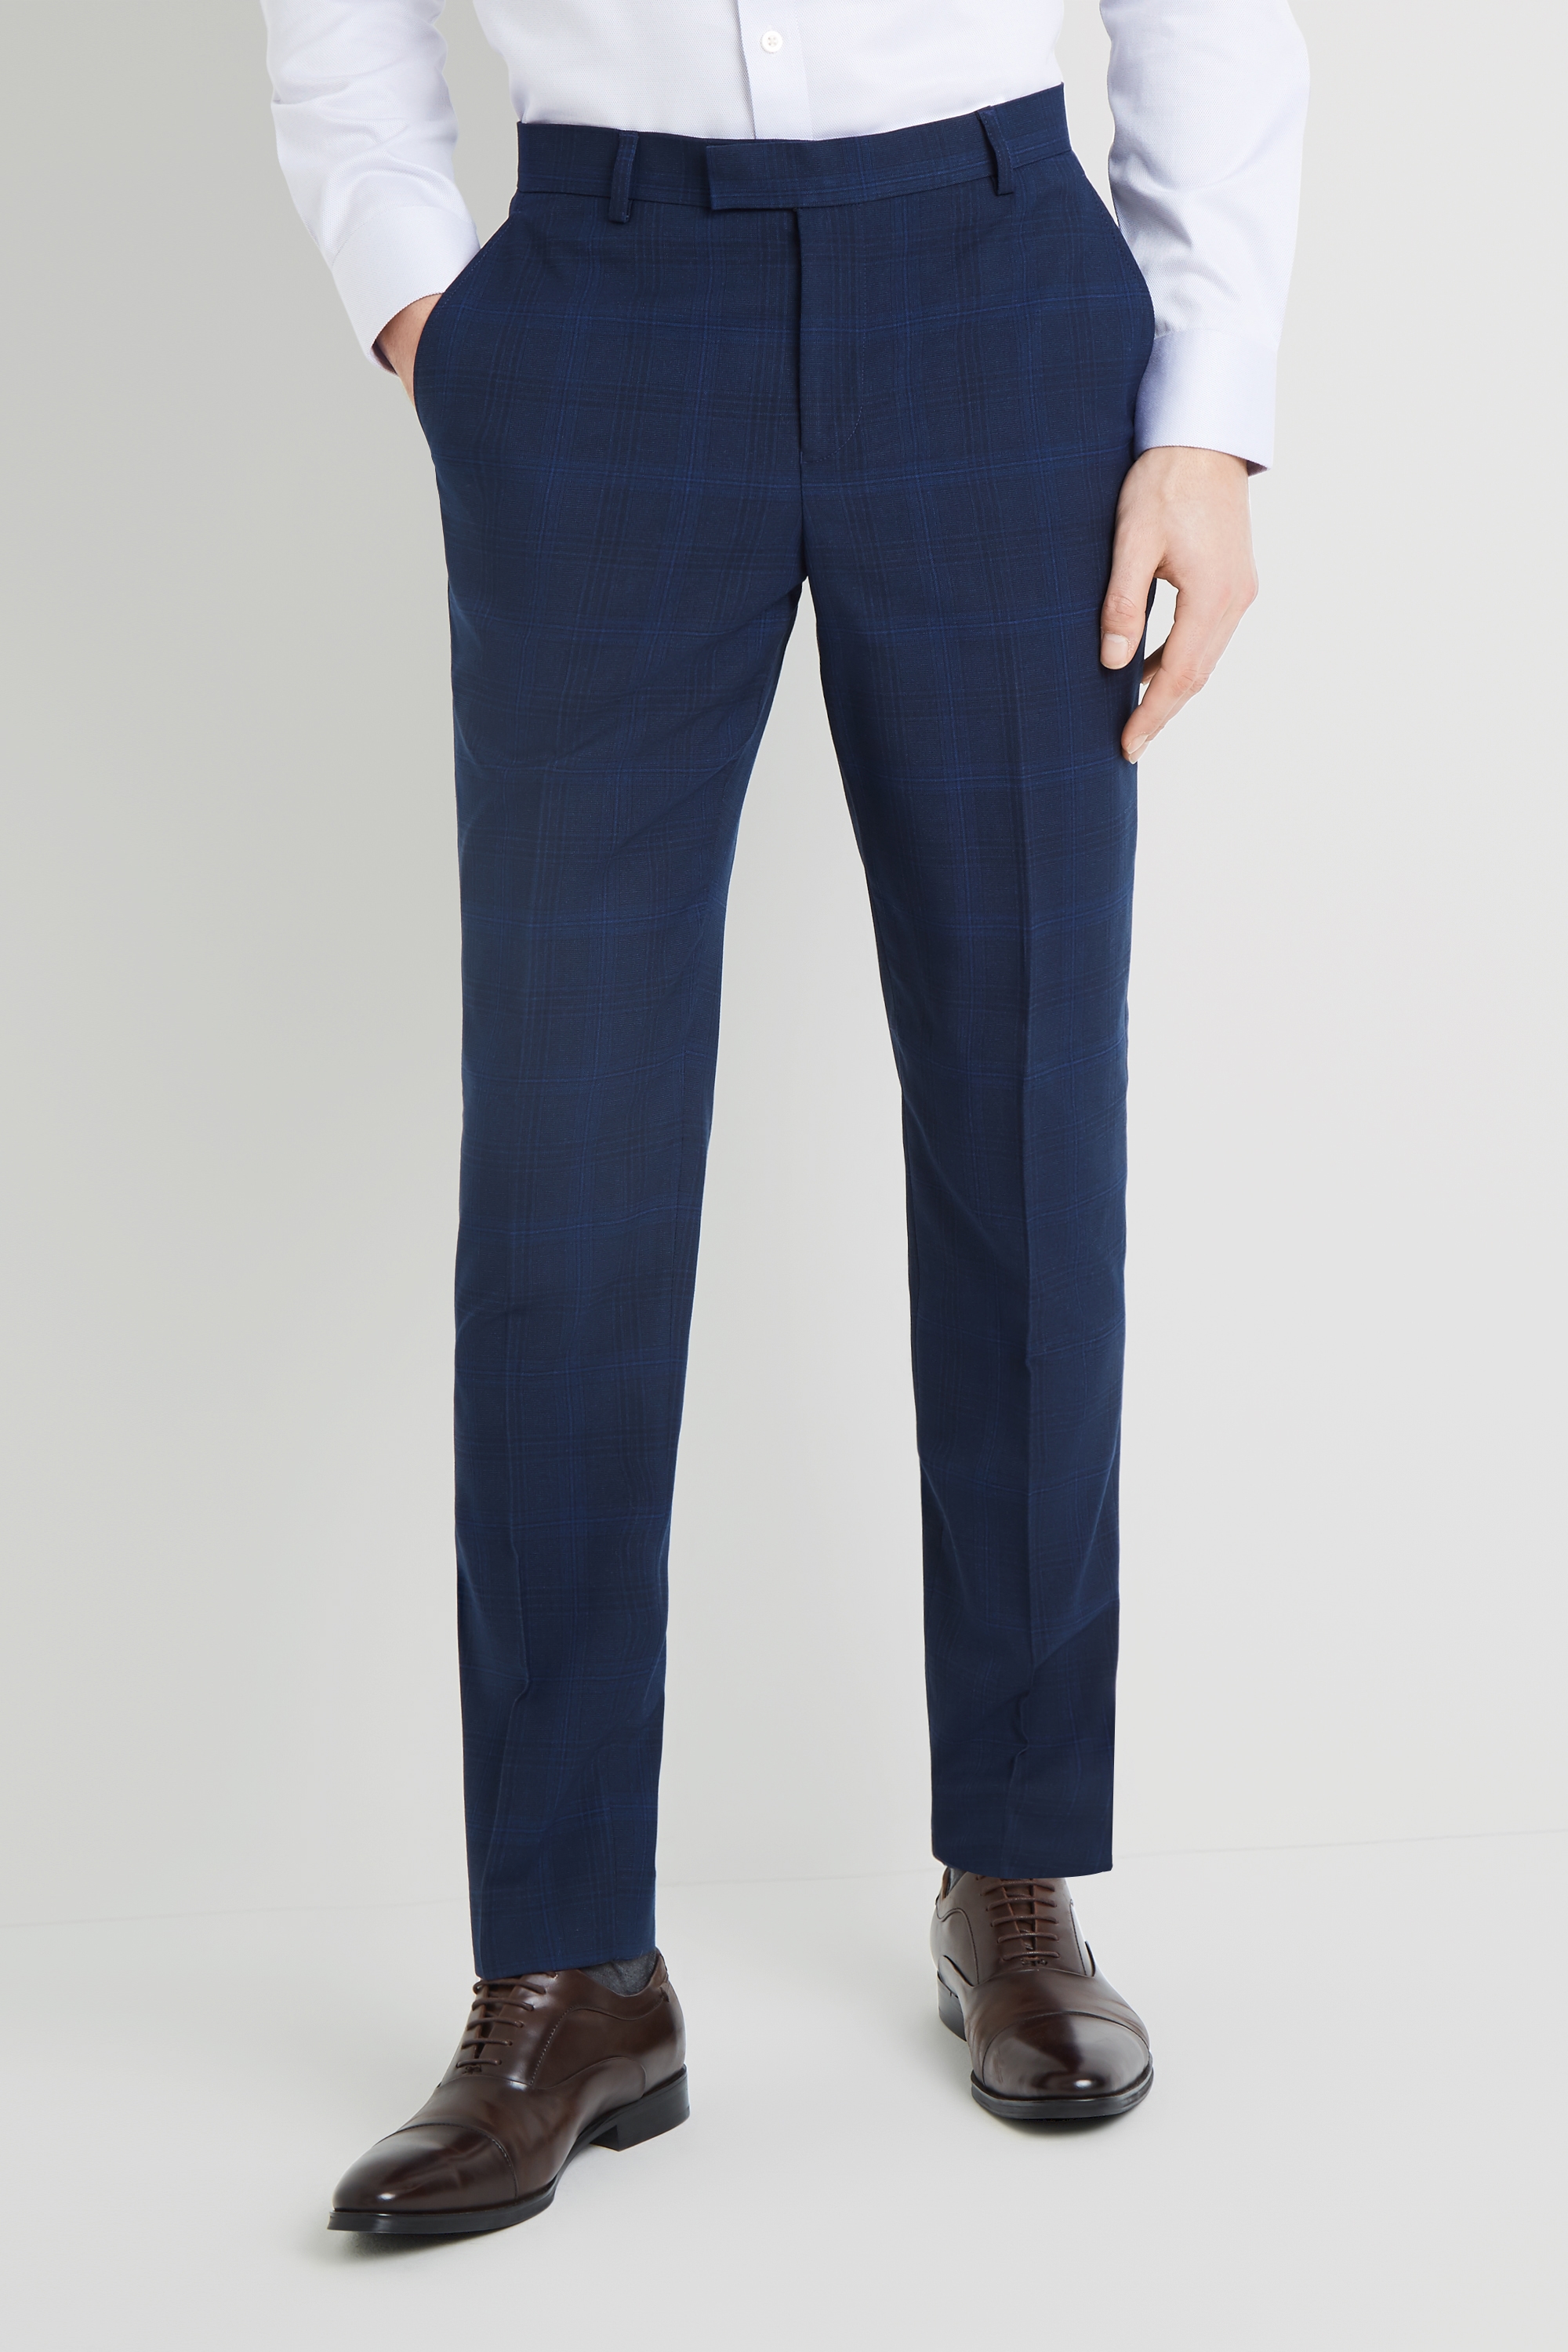 Moss 1851 Tailored Fit Bright Blue Check Trousers